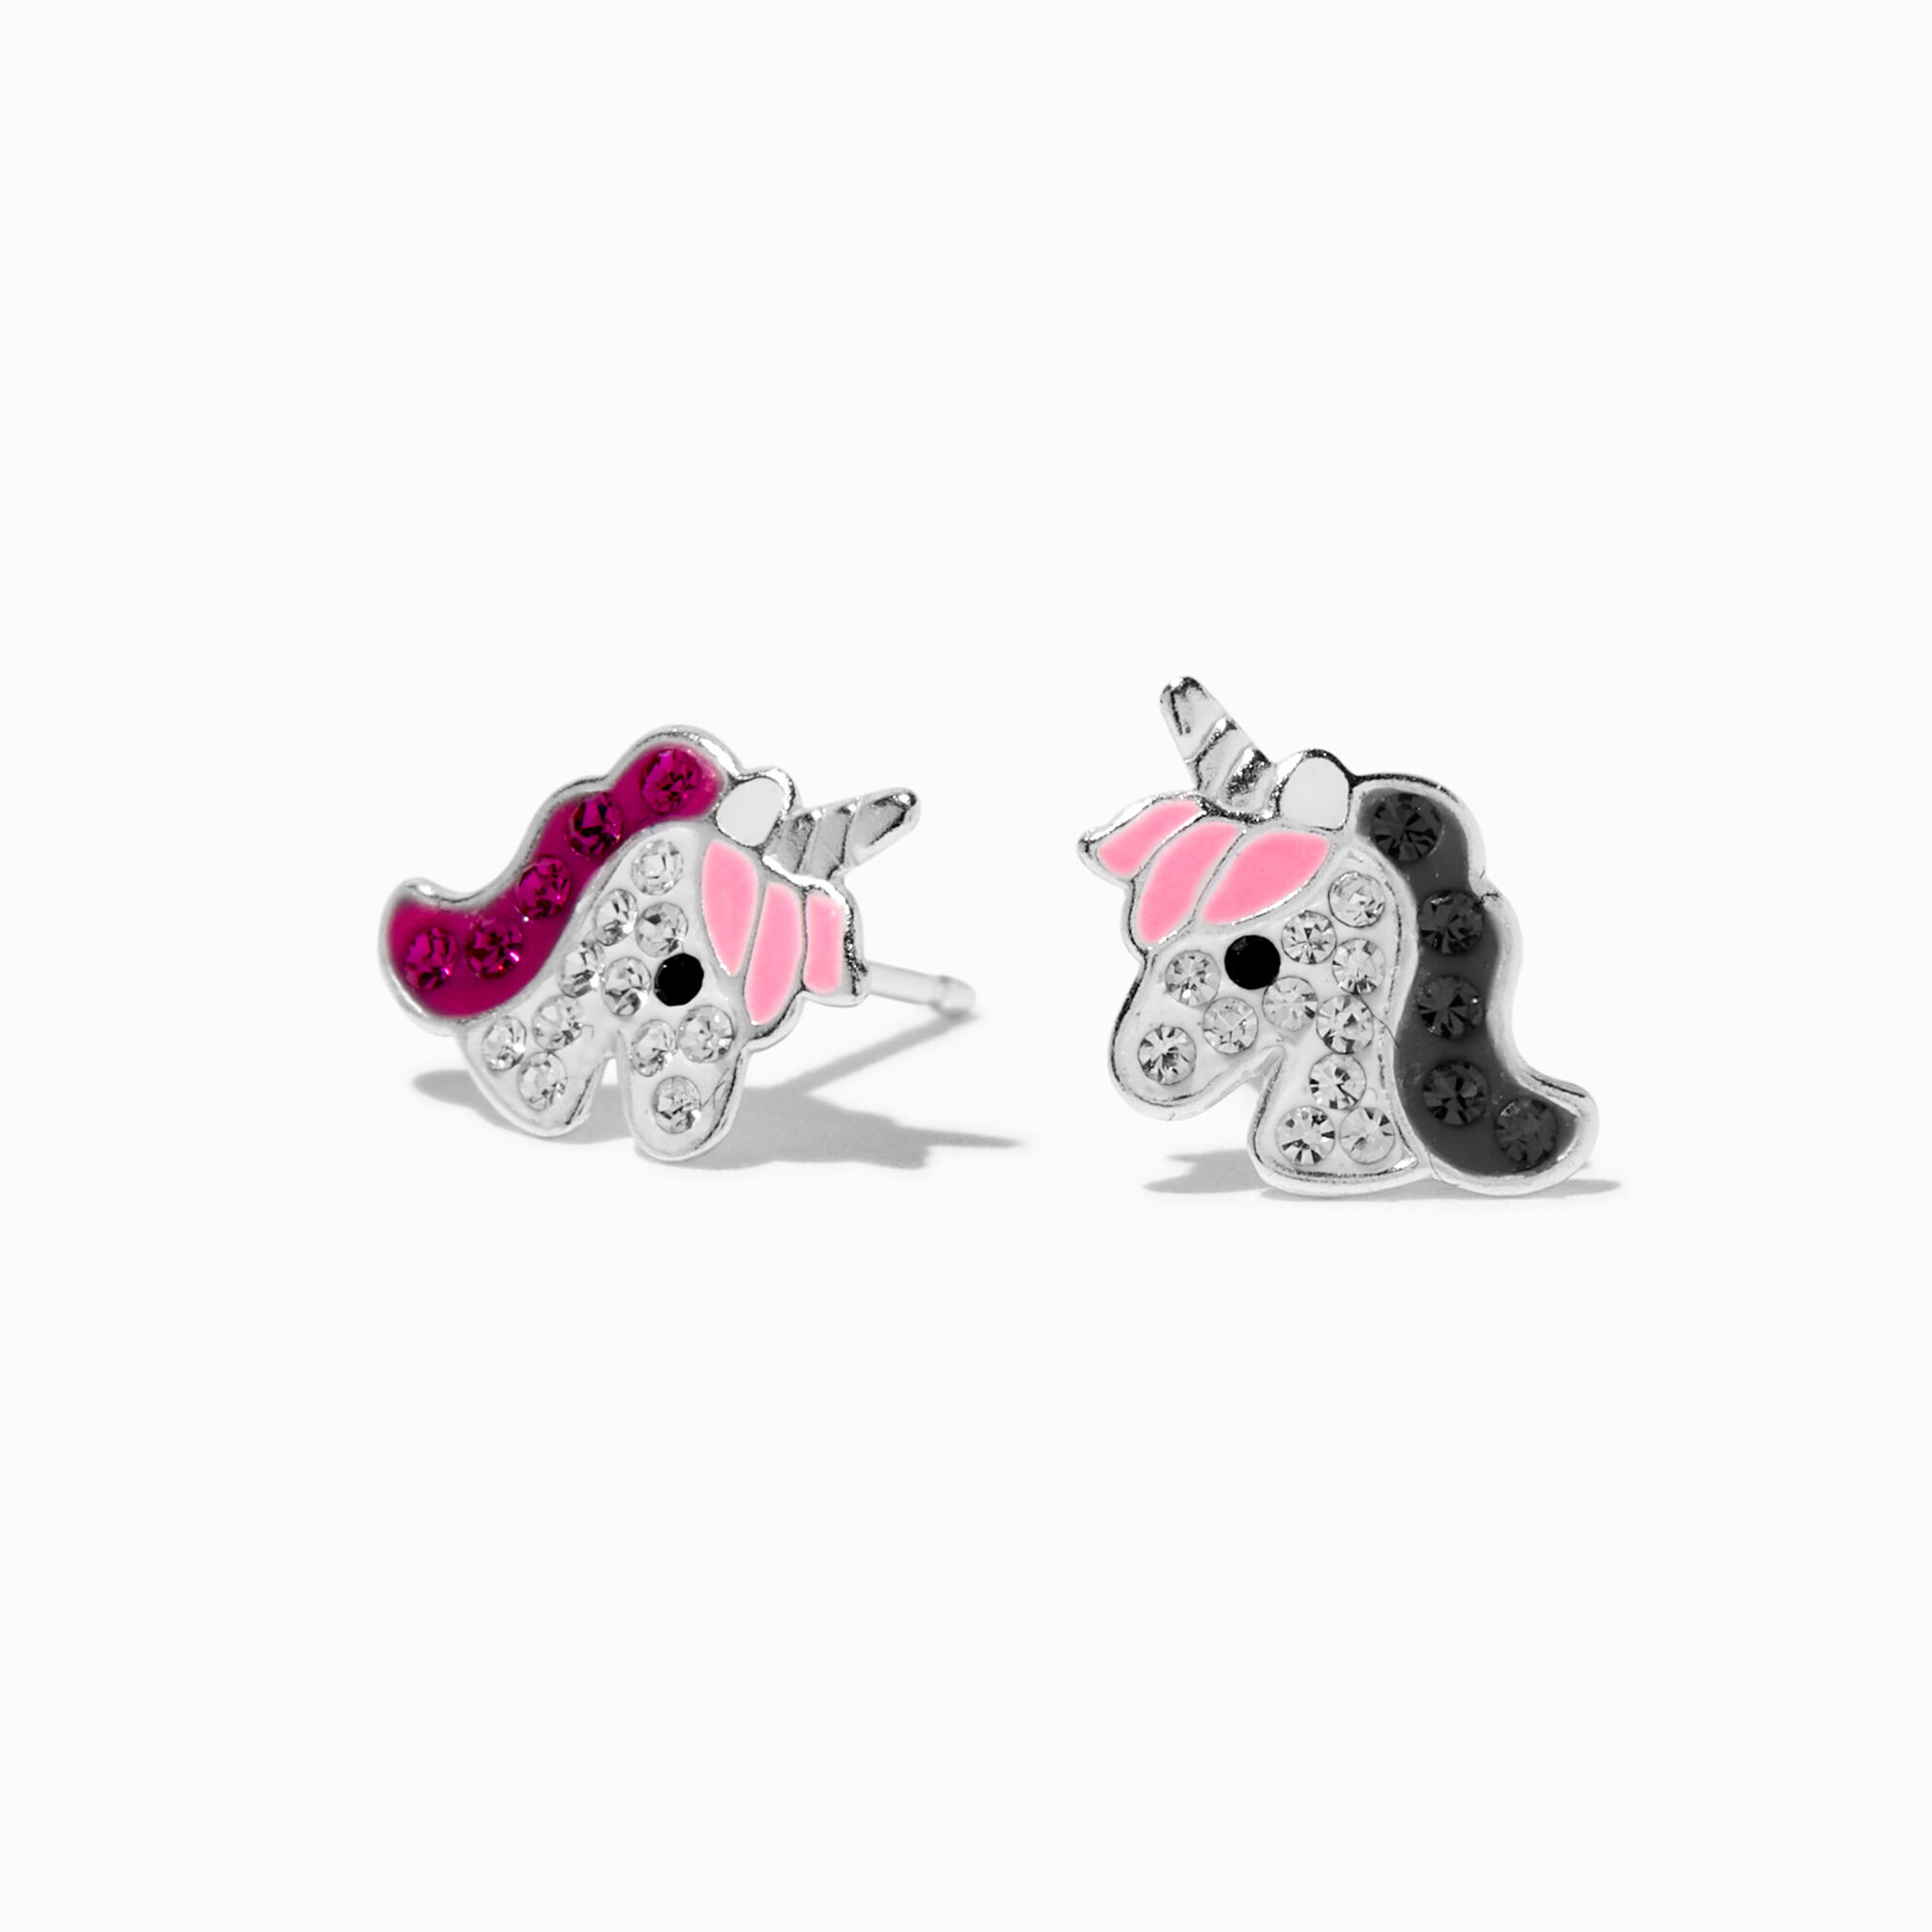 View Claires Crystal Unicorn Stud Earrings Silver information